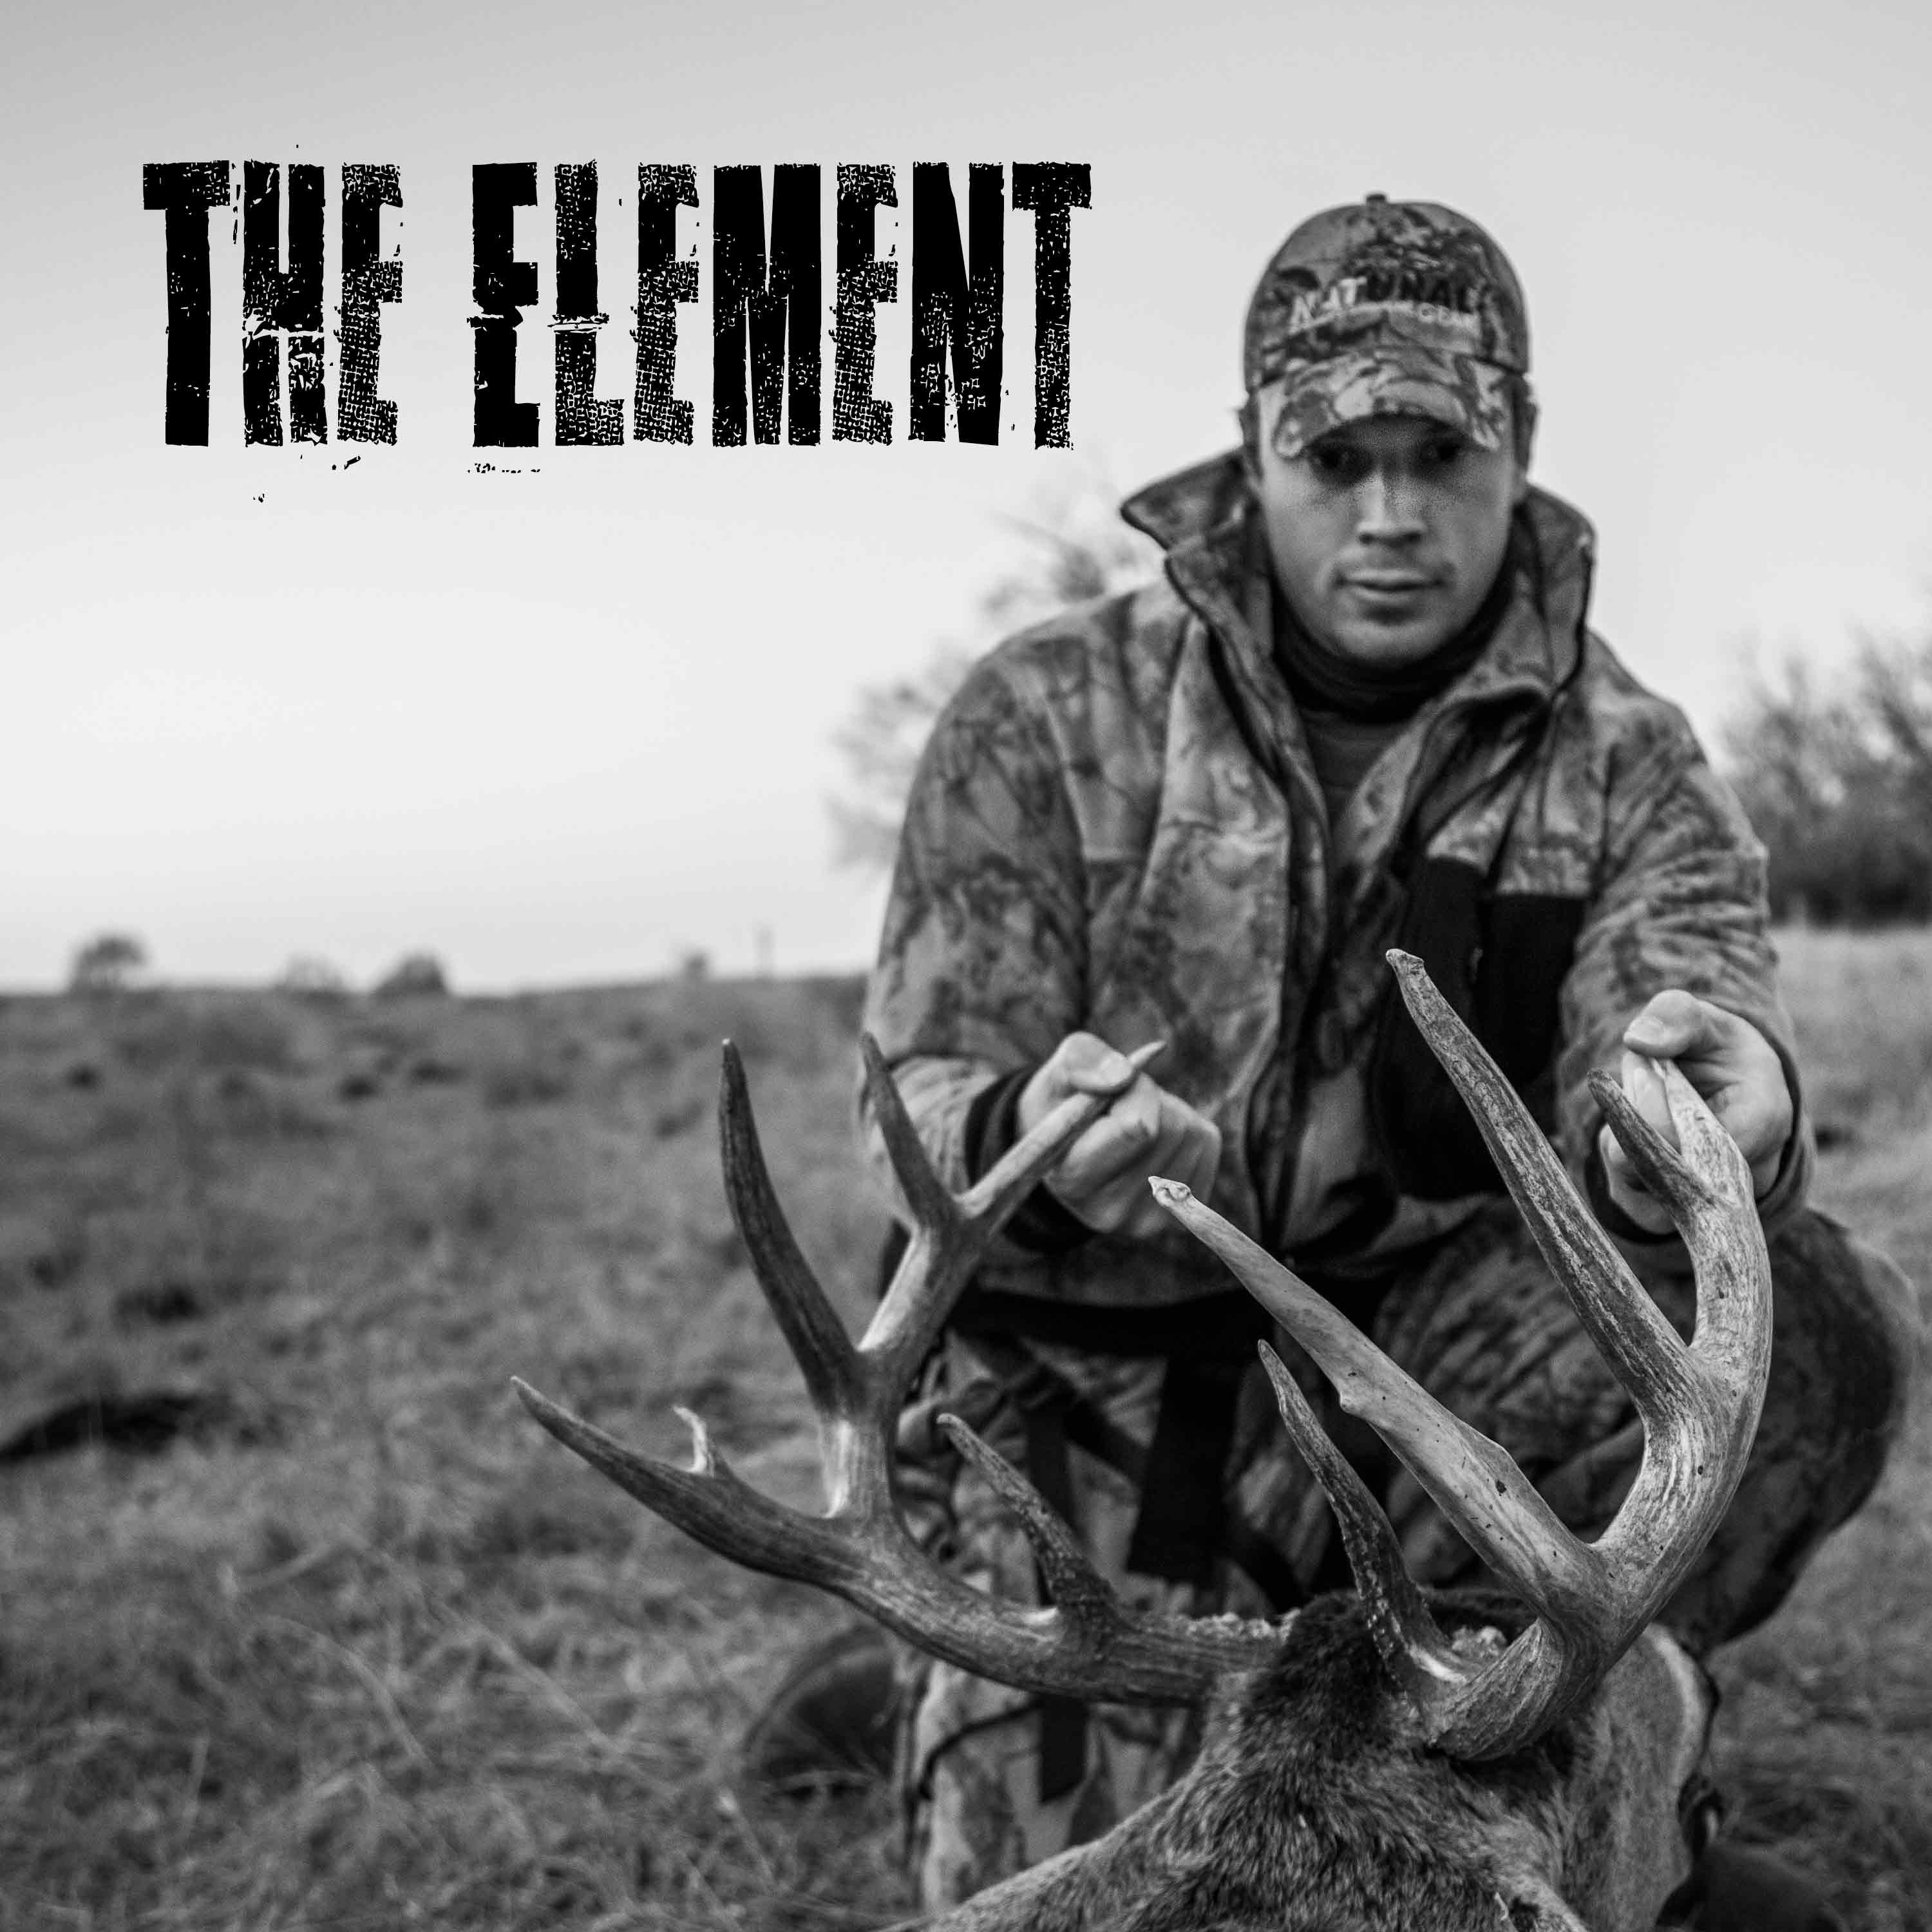 E90: Hunt It All This Fall (feat. Anthony Licata, Editor-in-Chief of Outdoor Life on Public Land Access and Opportunity, What To Hunt Where This Fall, and Making The Most of Your Hunting Season)